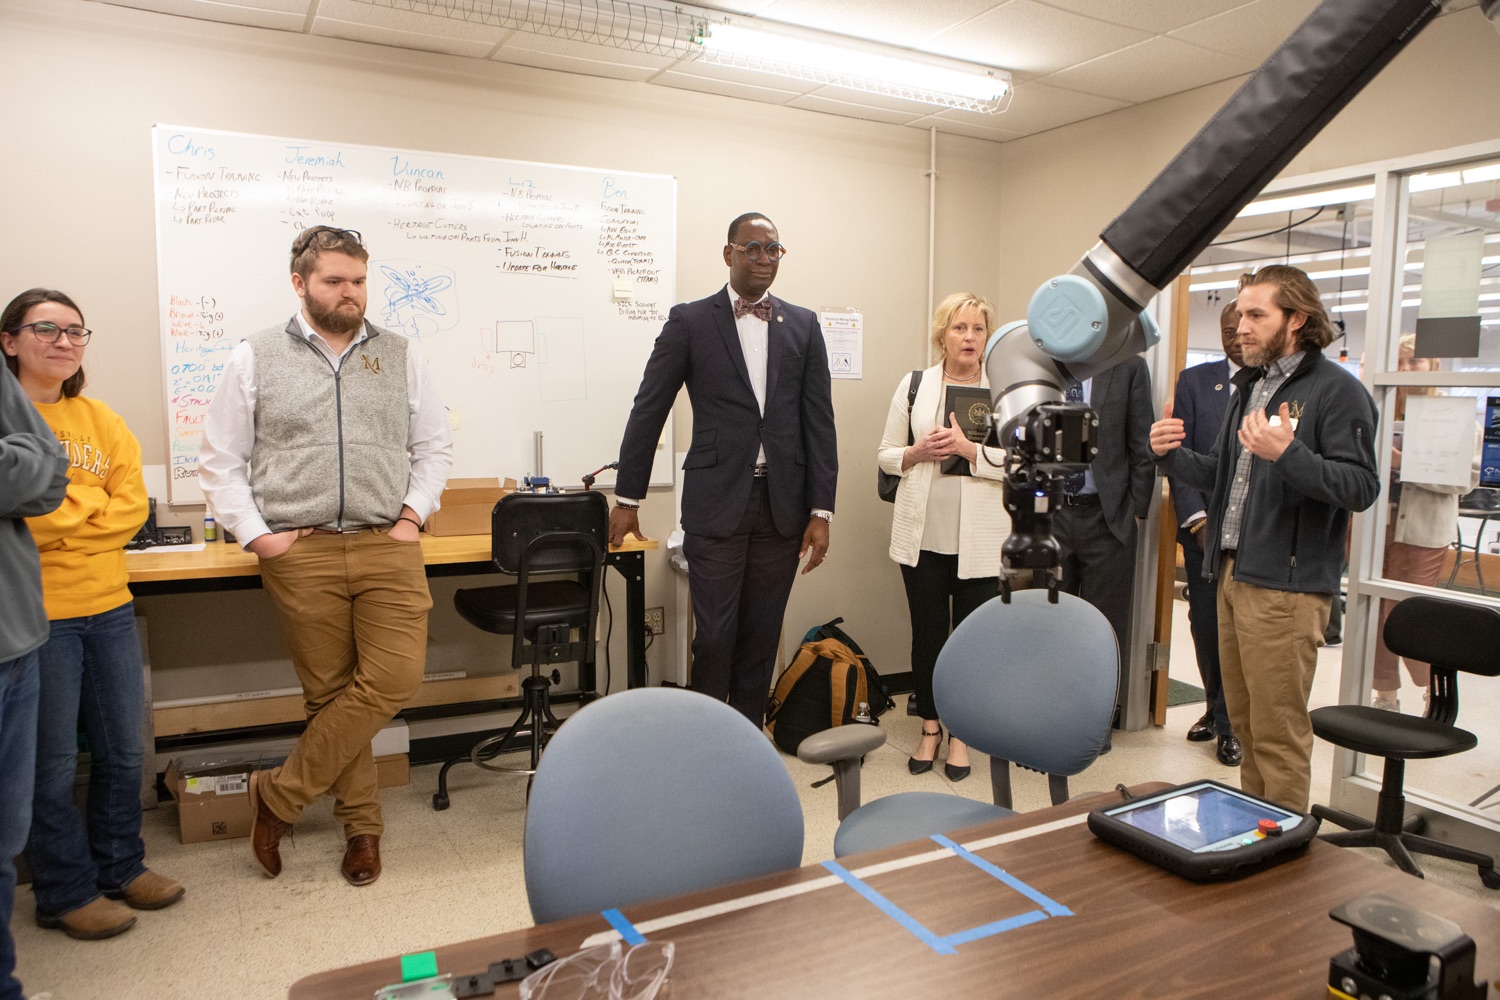 PDE Secretary Dr. Khalid N. Mumin takes a tour of the robotics lab area and learned how Millersville students are leaving the university with an array of job opportunities in high-paying, high-demand careers. ..Pennsylvania Department of Education (PDE) Secretary Dr. Khalid N. Mumin and Deputy Secretary Dr. Kate Shaw joined Pennsylvania State System of Higher Education (PASSHE) Chancellor Dan Greenstein at Millersville University to highlight Governor Shapiros proposed investments in higher education and how Pennsylvanias public postsecondary system is preparing students to be workforce-ready upon graduation.. .Governor Shapiros blueprint for higher education will help Pennsylvanias public universities build on areas of strength and address the challenges caused by a 30-year disinvestment in higher education by the Commonwealth, such as competition between universities that results in higher costs and lower enrollment. Governor Shapiros blueprint will ensure better coordination across PASSHE universities and community colleges to expand access to affordable, workforce-ready credentials and degrees across Pennsylvania  including in areas that currently lack access.. .Our Commonwealths institutions of higher education, like Millersville University, do an incredible job preparing students for the future and connecting them with future opportunities, said Secretary Khalid N. Mumin. Governor Josh Shapiros new blueprint for higher education will end the era of disinvestment in our higher education sector, make postsecondary education more accessible and affordable to more Pennsylvanians, and allow these schools to continue to do what they do besteducate learners..<br><a href="https://filesource.amperwave.net/commonwealthofpa/photo/24436_PDE_Blueprint_ERD_060.jpg" target="_blank">⇣ Download Photo</a>